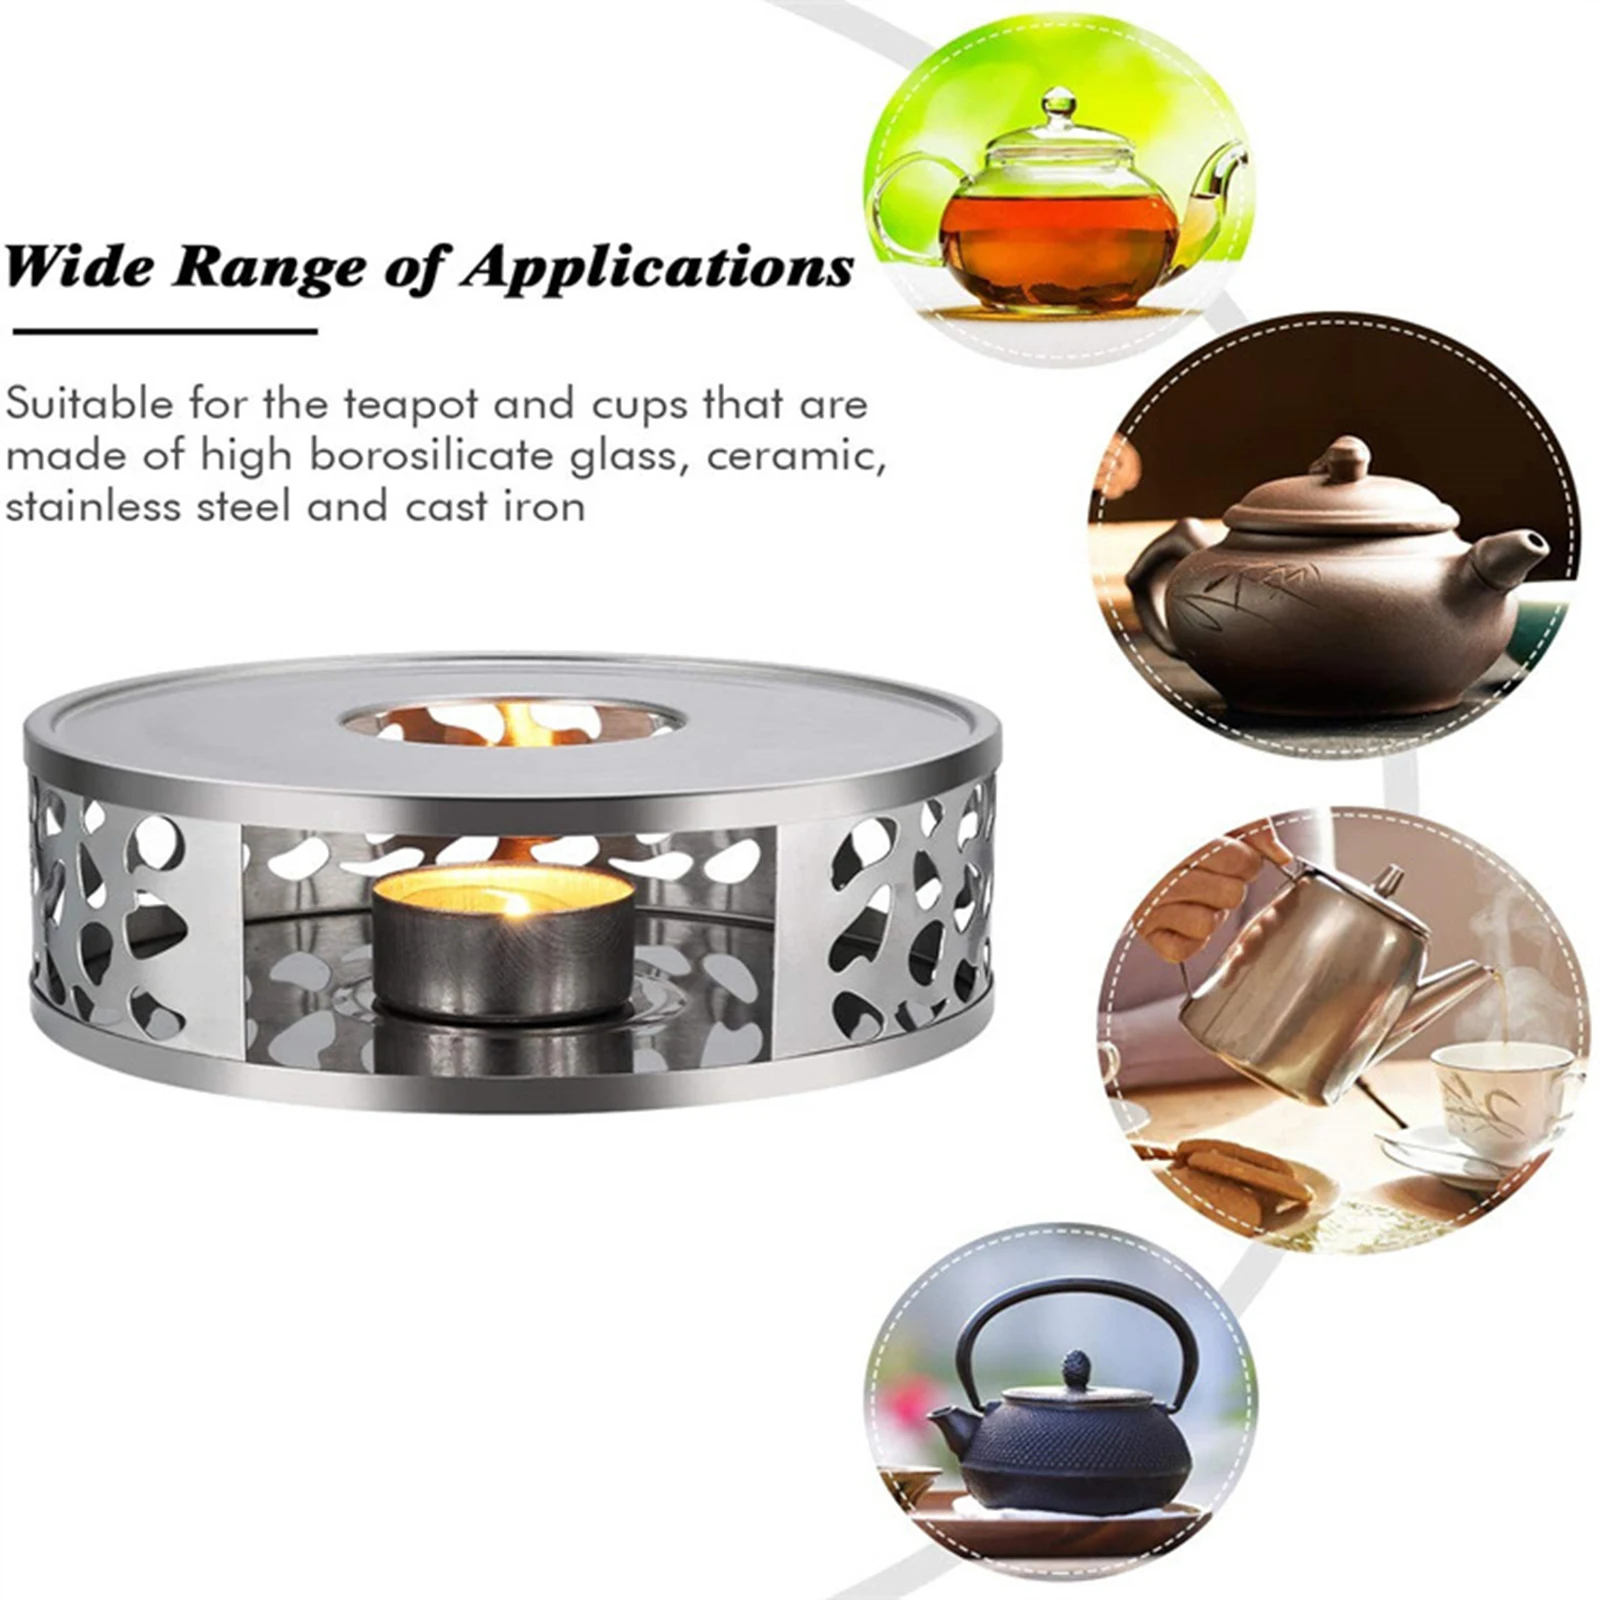 Candle Holders Glass Teapot Heating Base Stainless Steel Stove Tea Pot Candle Warmer Tea Accessories Tealight Holder Home Tools